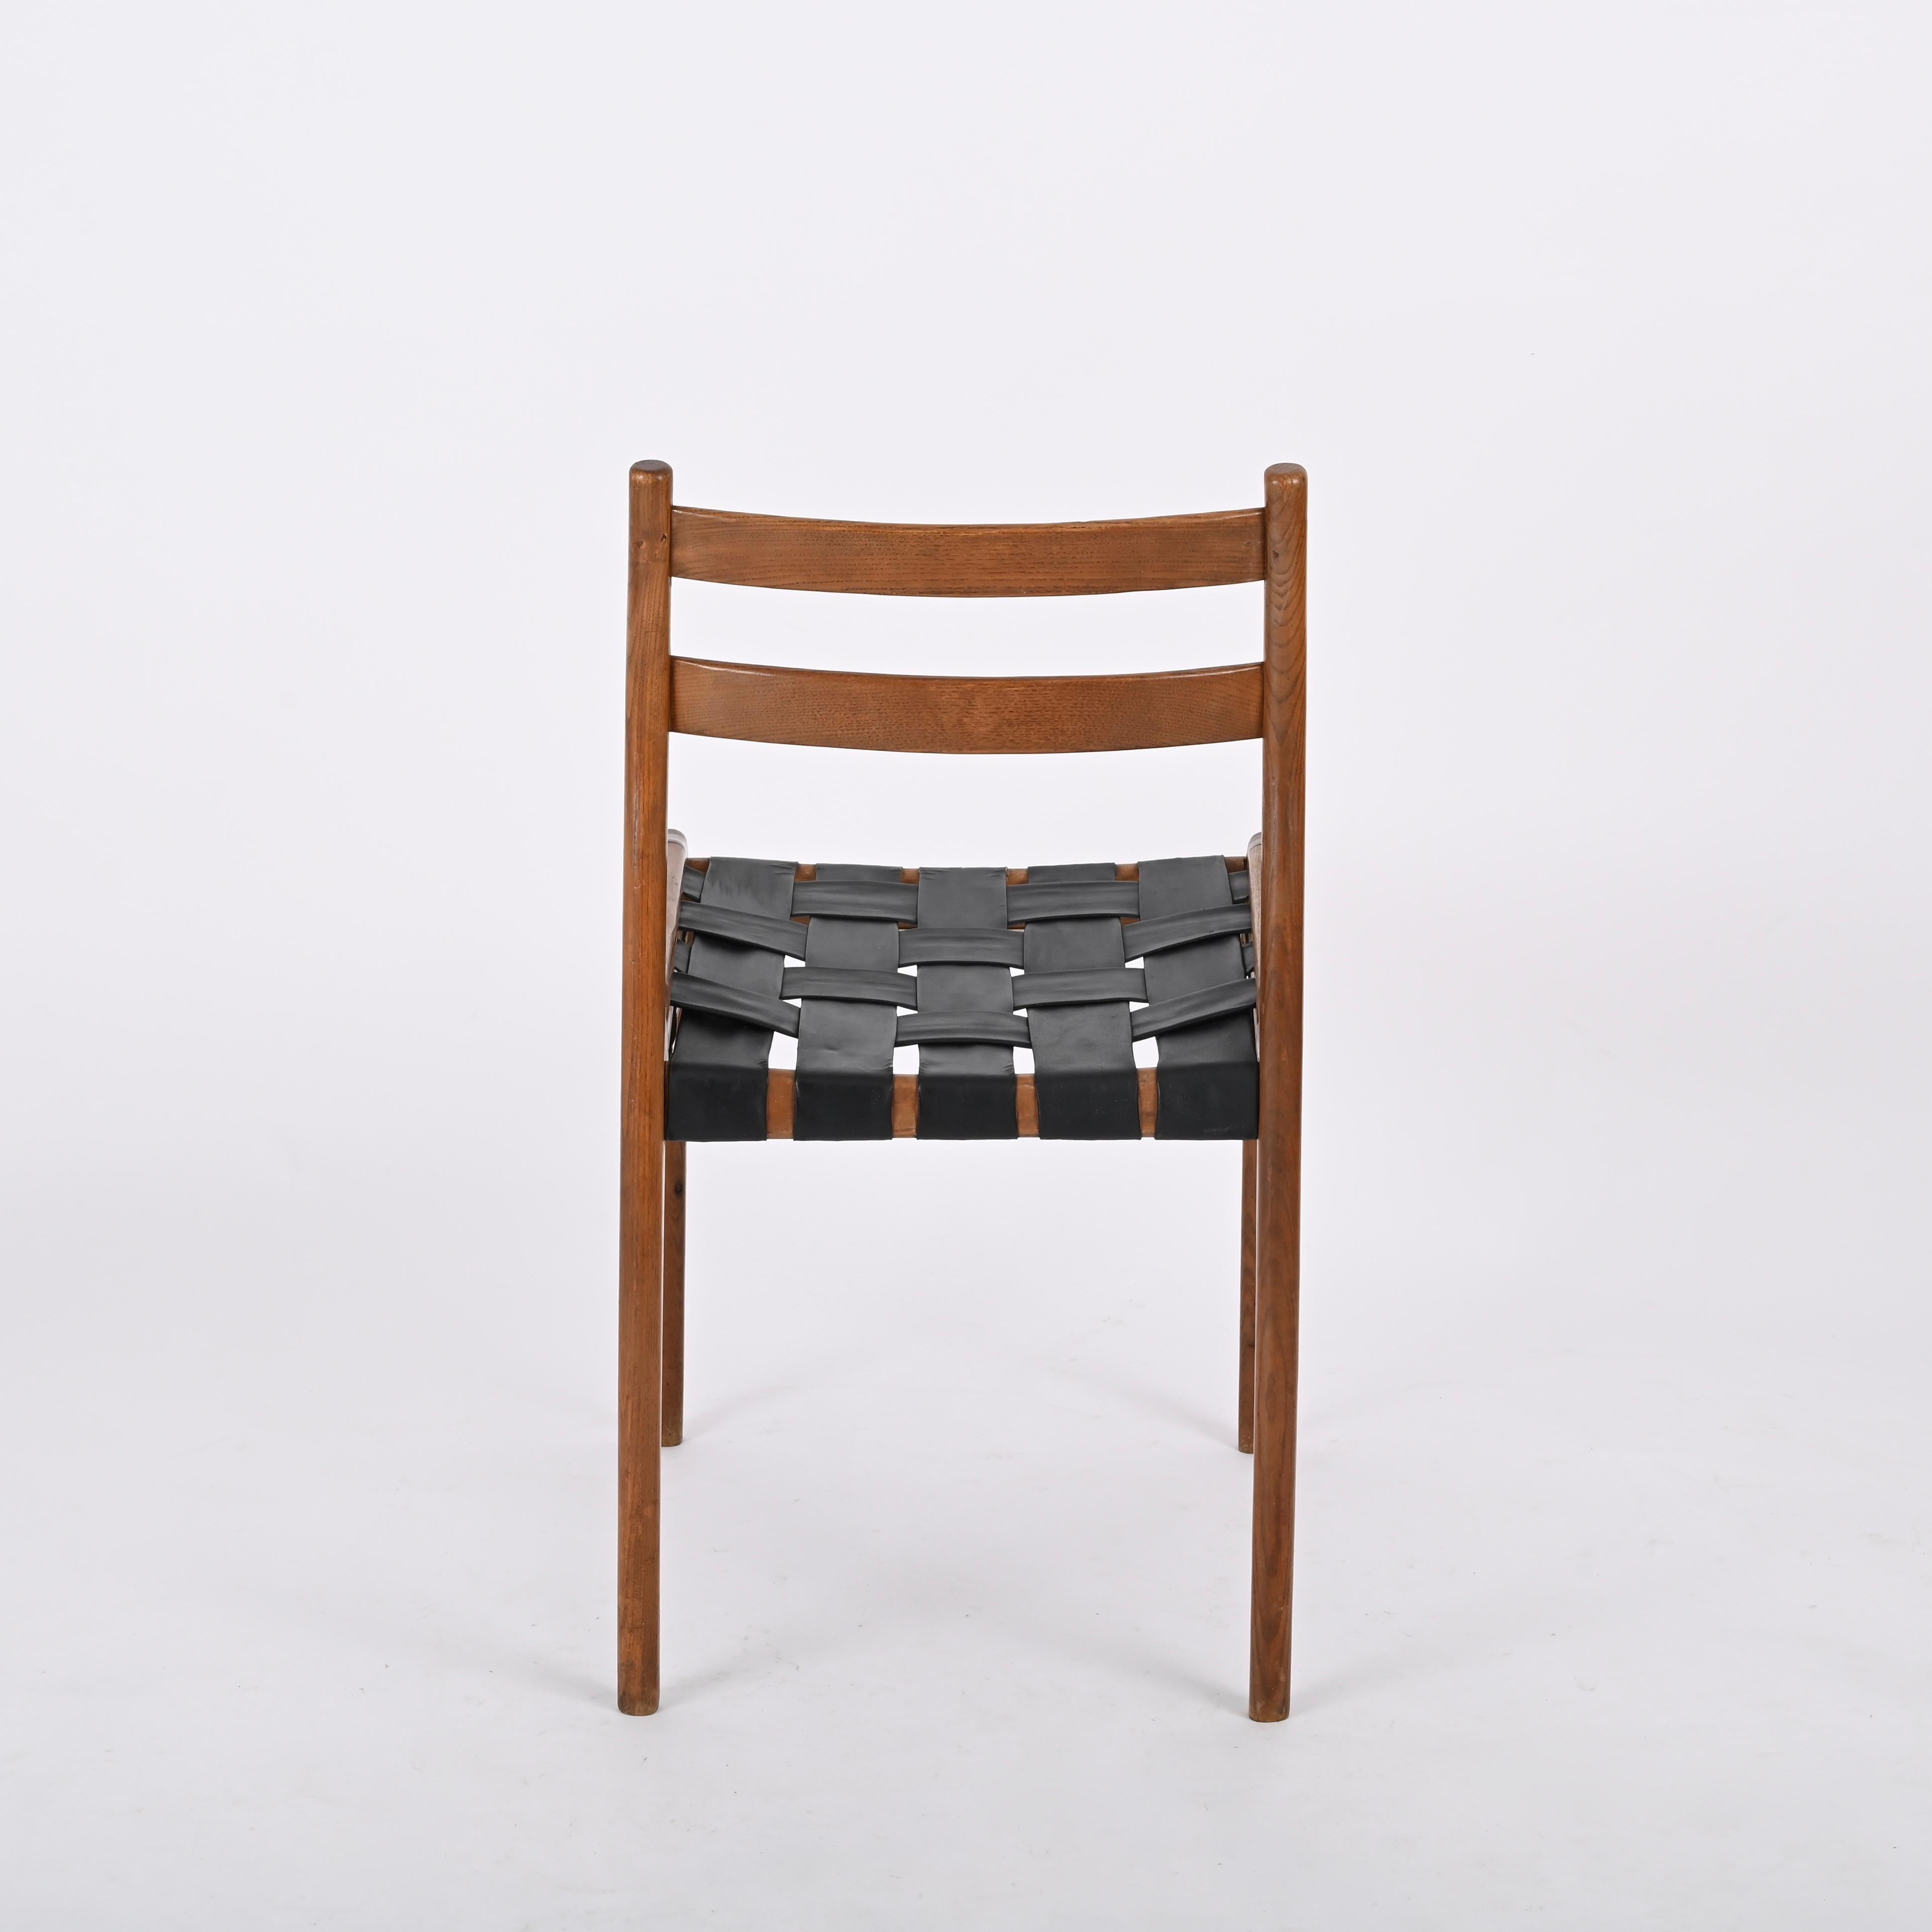 Italian Mid-Century Chair in Oak and Leather by Palange for Montina, 1960s For Sale 5